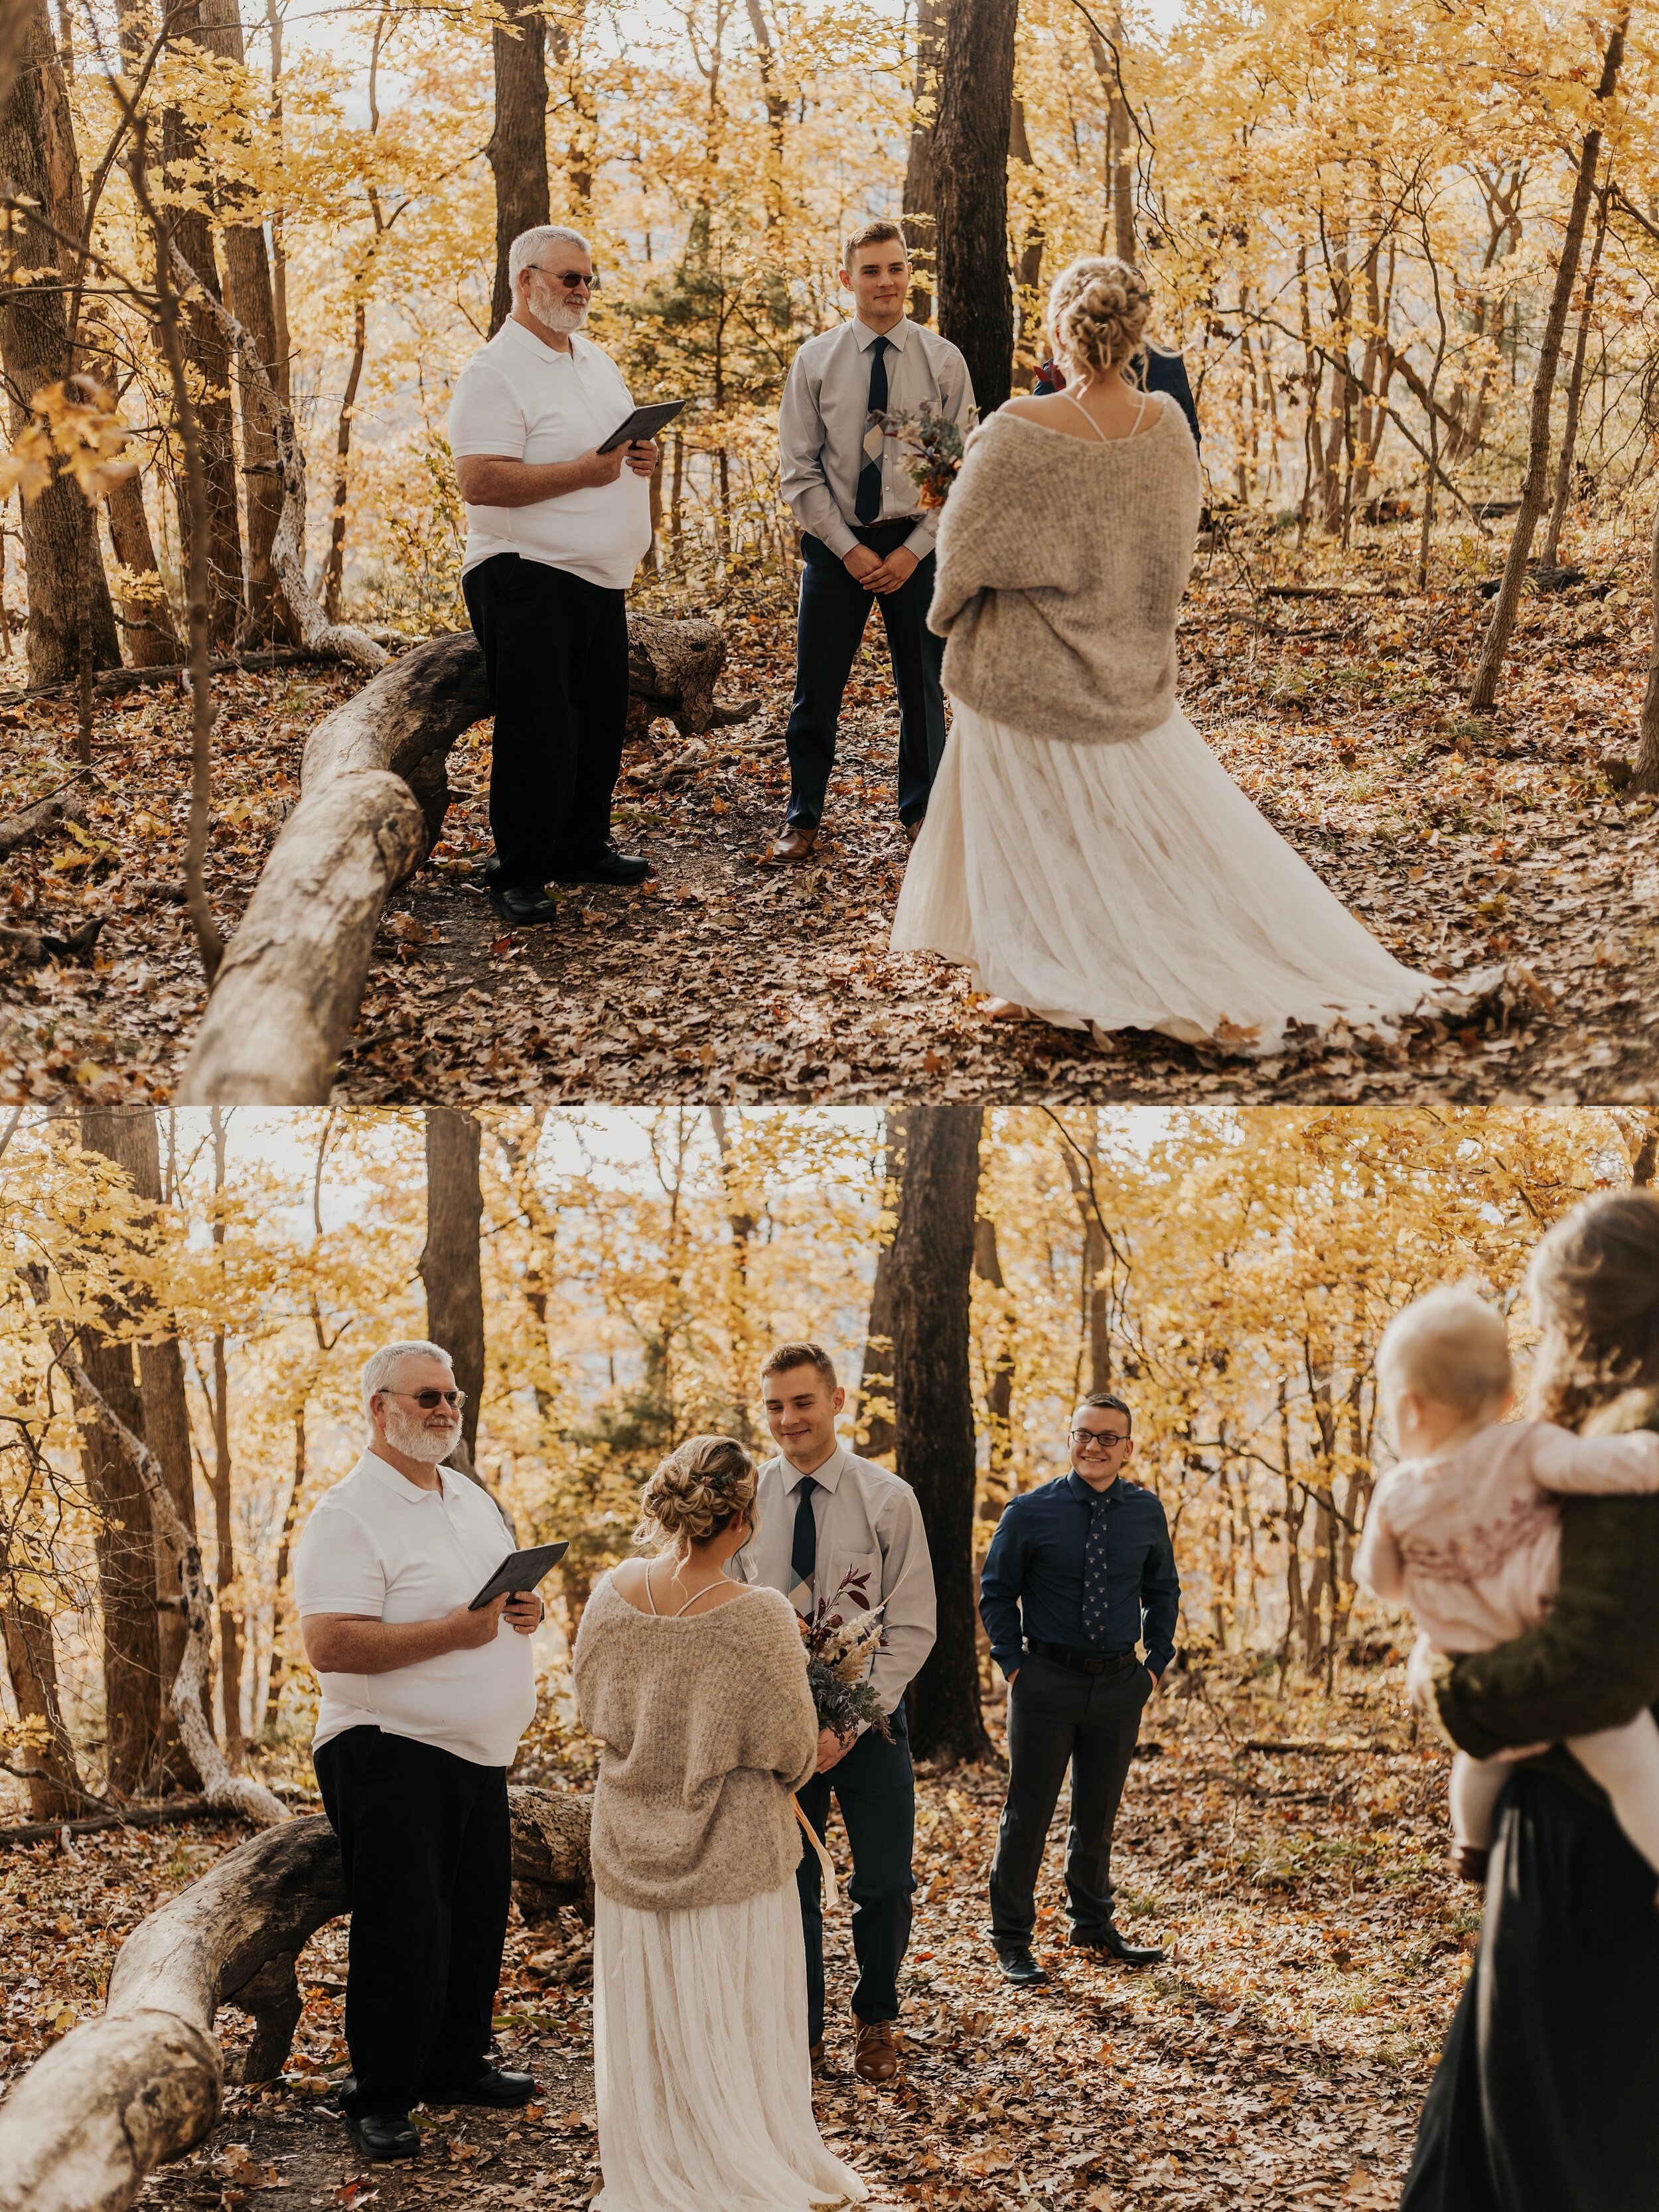 jessika-christine-photography-elopement-couples-outdoor-adventurous-session (2).jpg